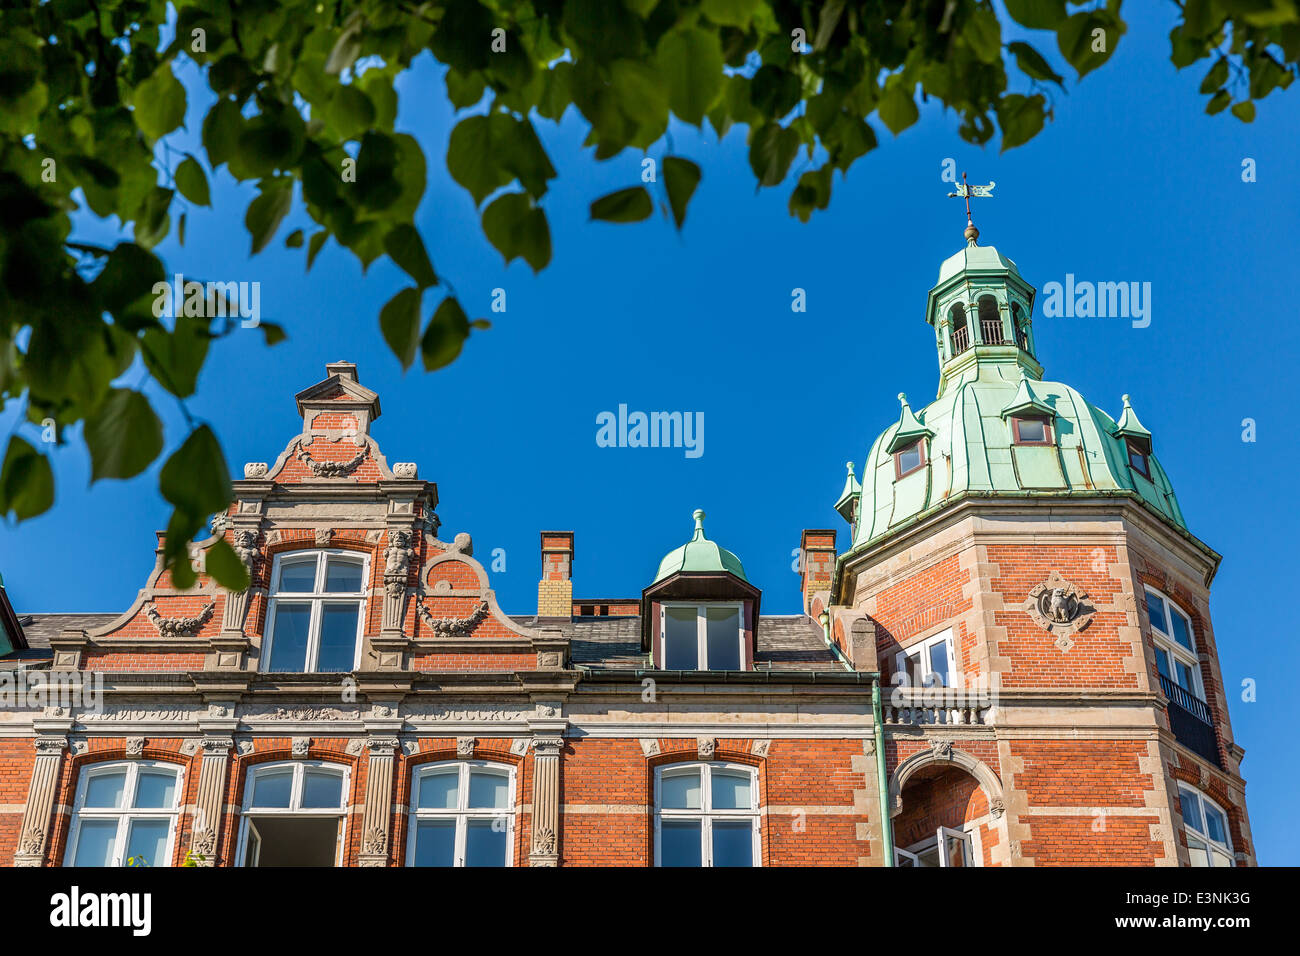 A typical spire on one of the old houses in Copenhagen, Denmark Stock Photo